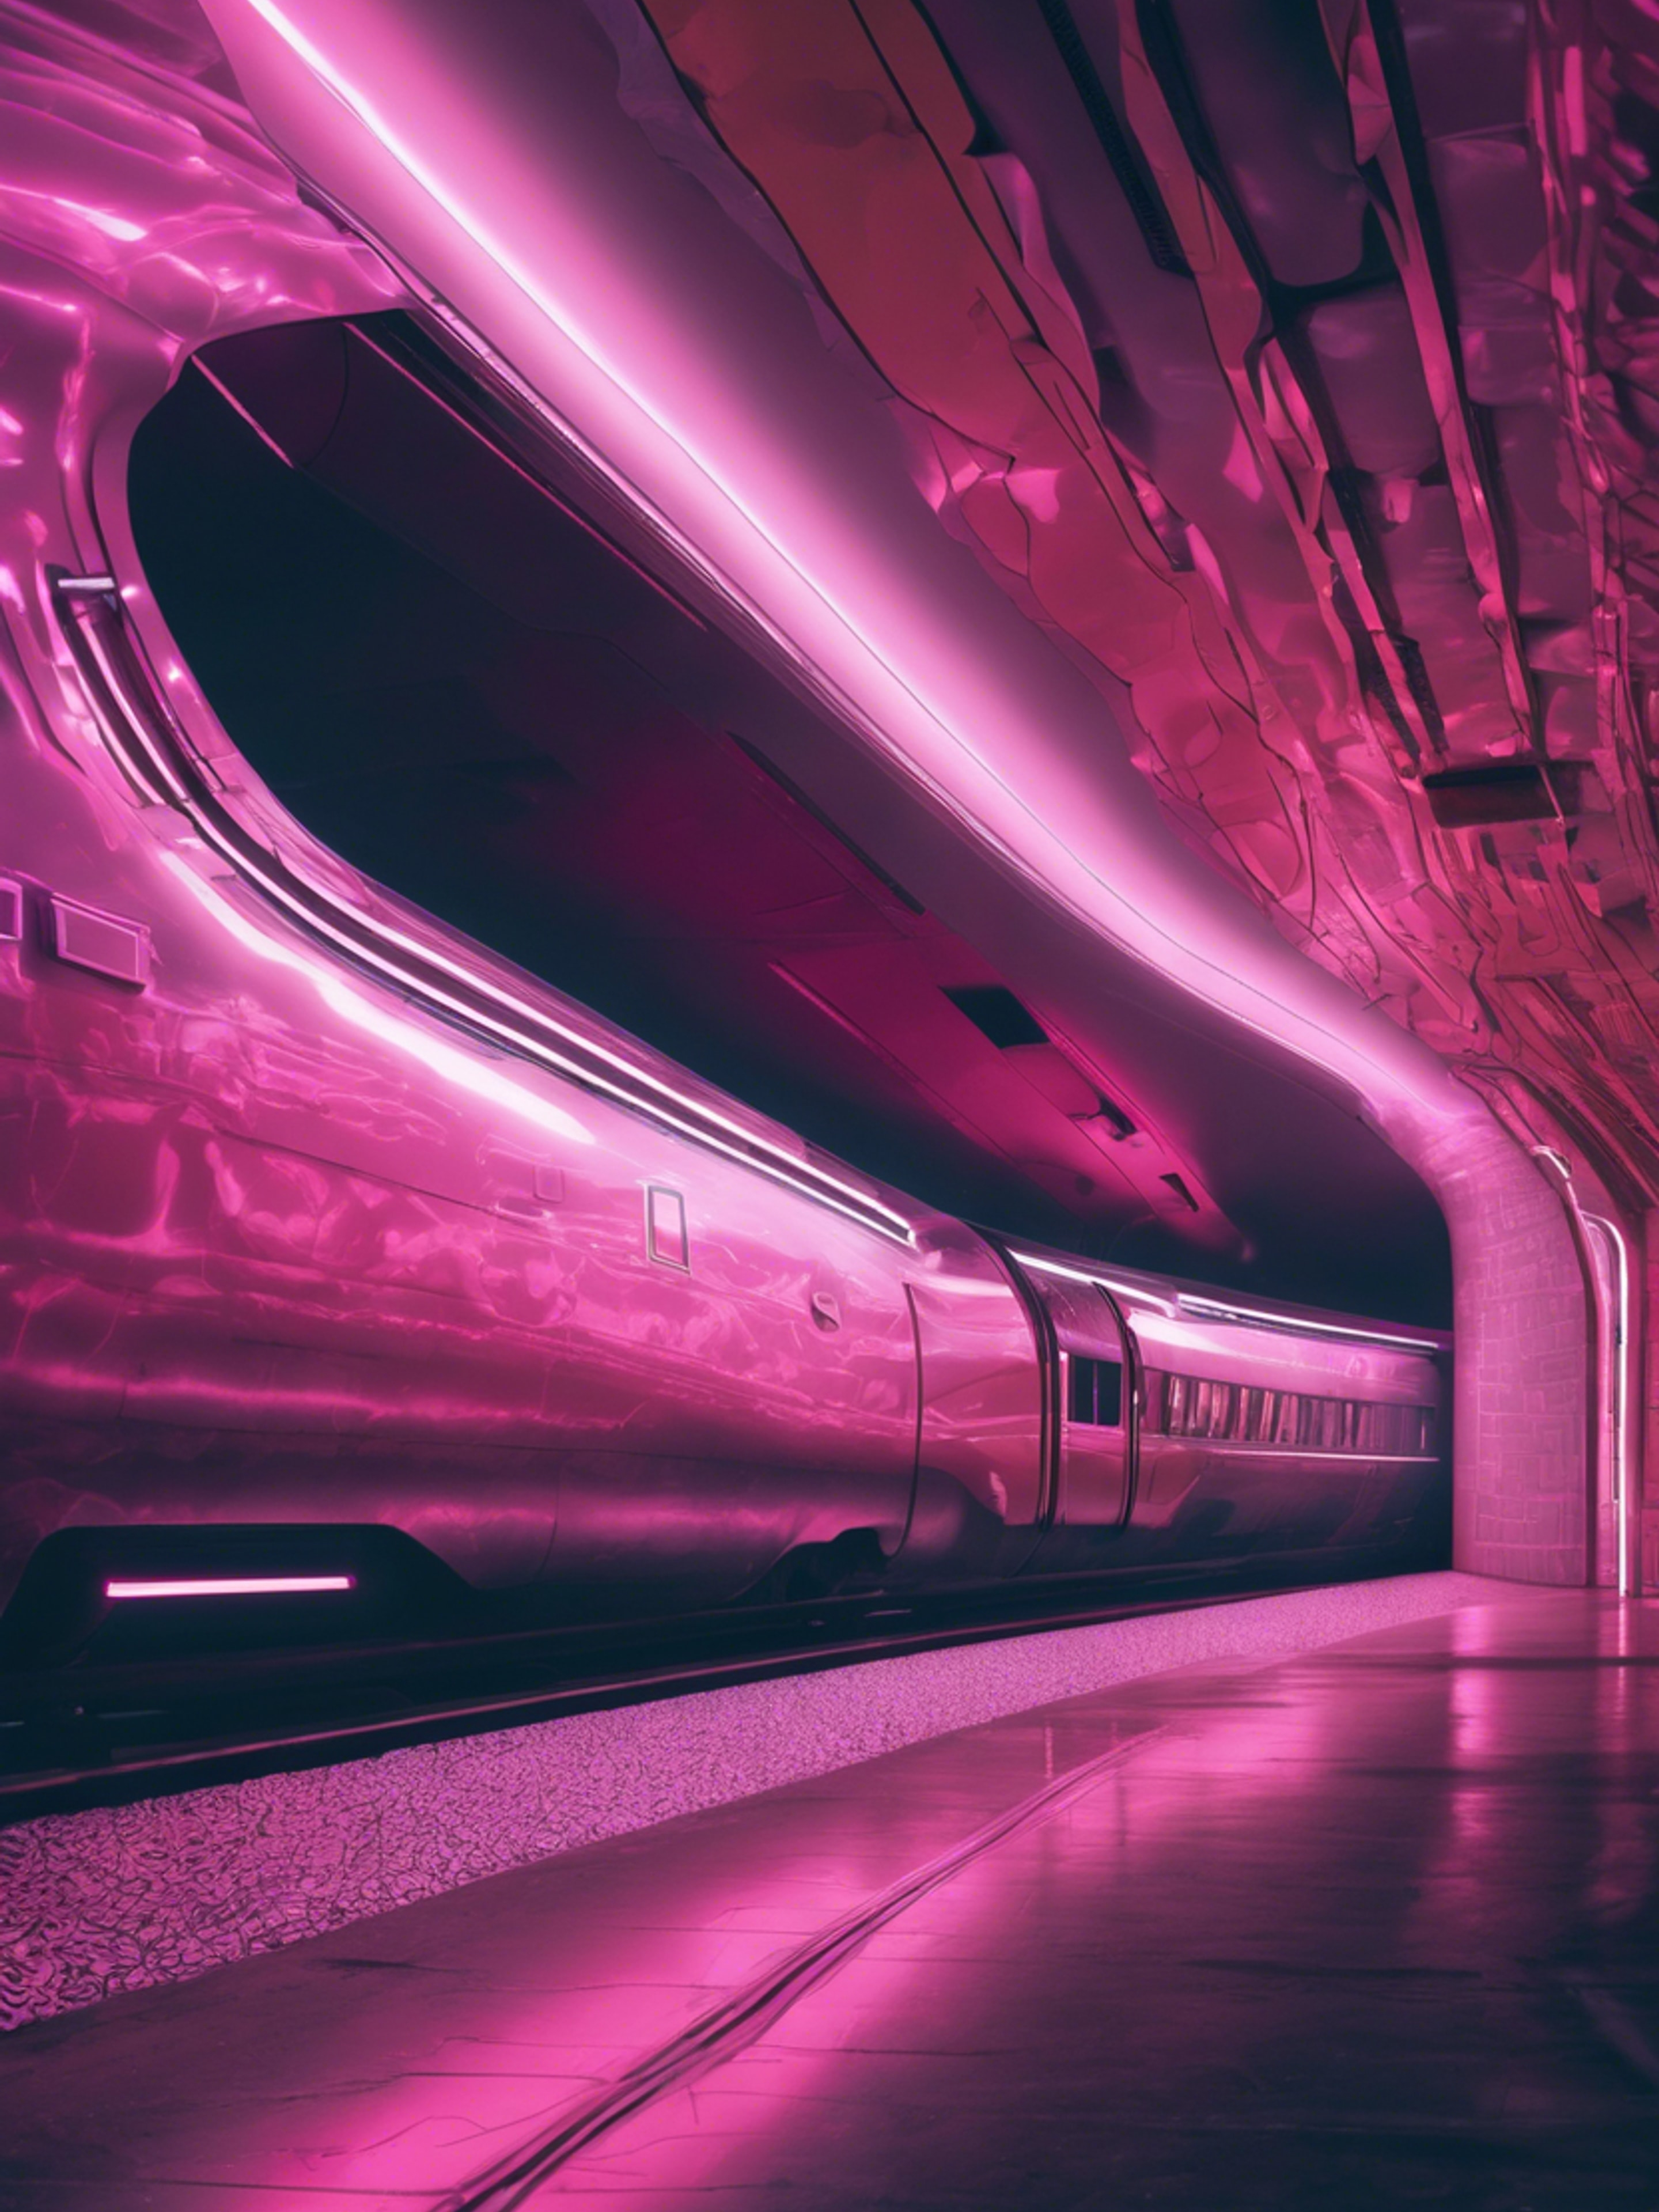 A sleek and shiny Cyber Y2K-style train speeding through a tunnel lit with neon lights. Wallpaper[25842df342c8431fa80b]